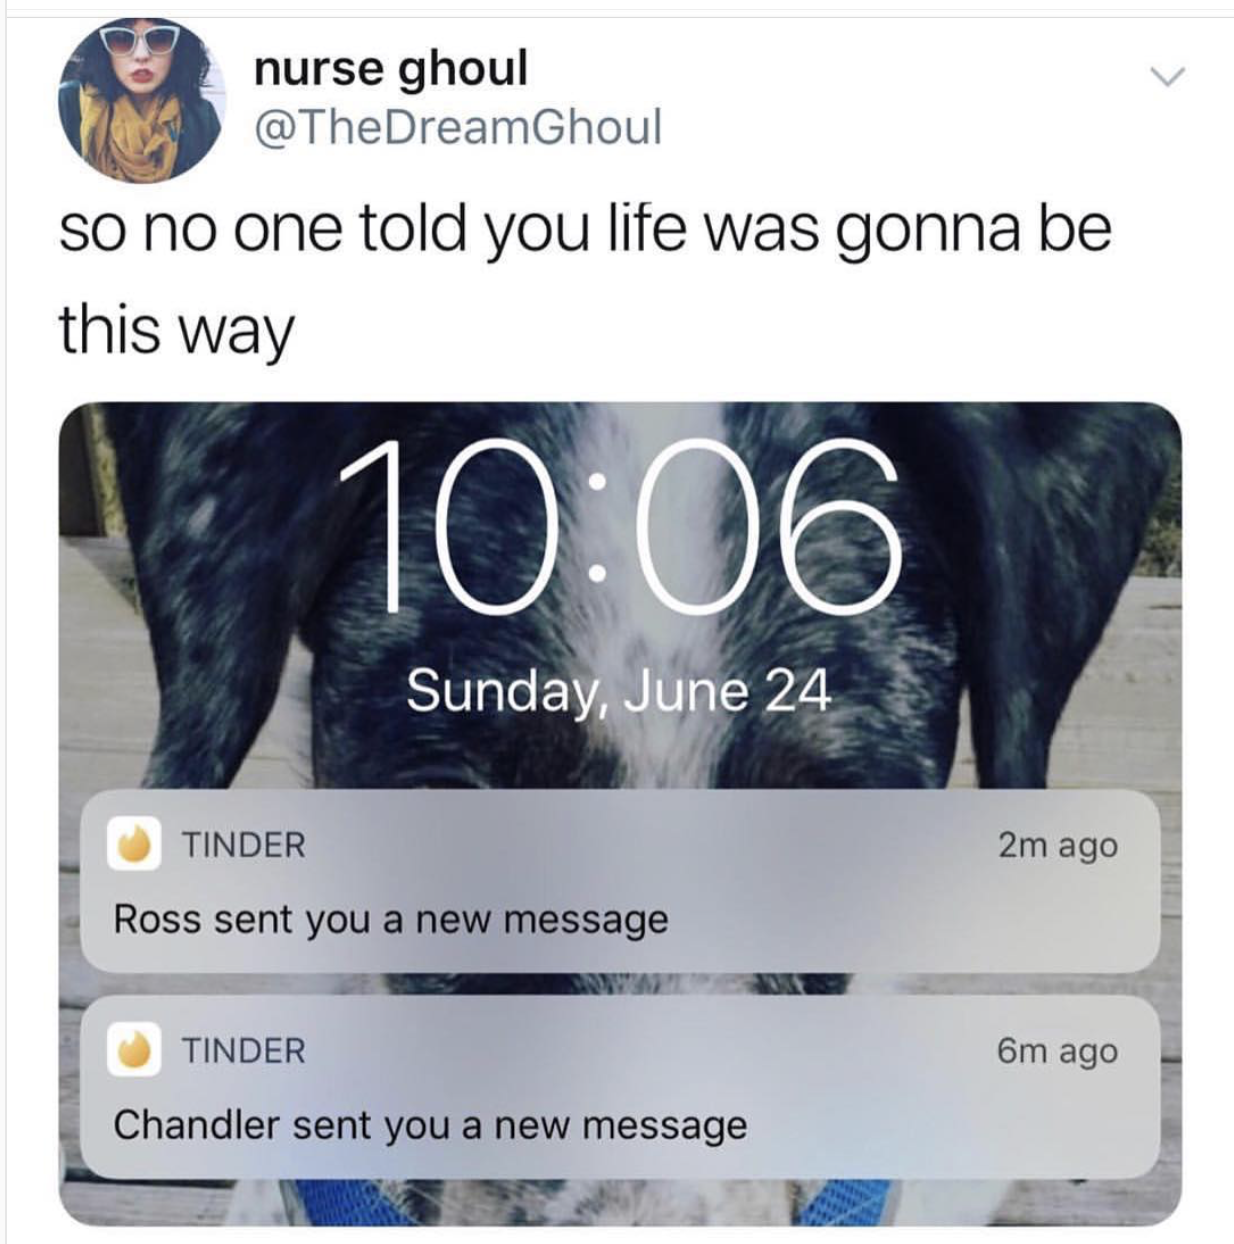 tinder no one told you life was gonna be this way - nurse ghoul so no one told you life was gonna be this way Sunday, June 24 Tinder 2m ago Ross sent you a new message Tinder 6m ago Chandler sent you a new message